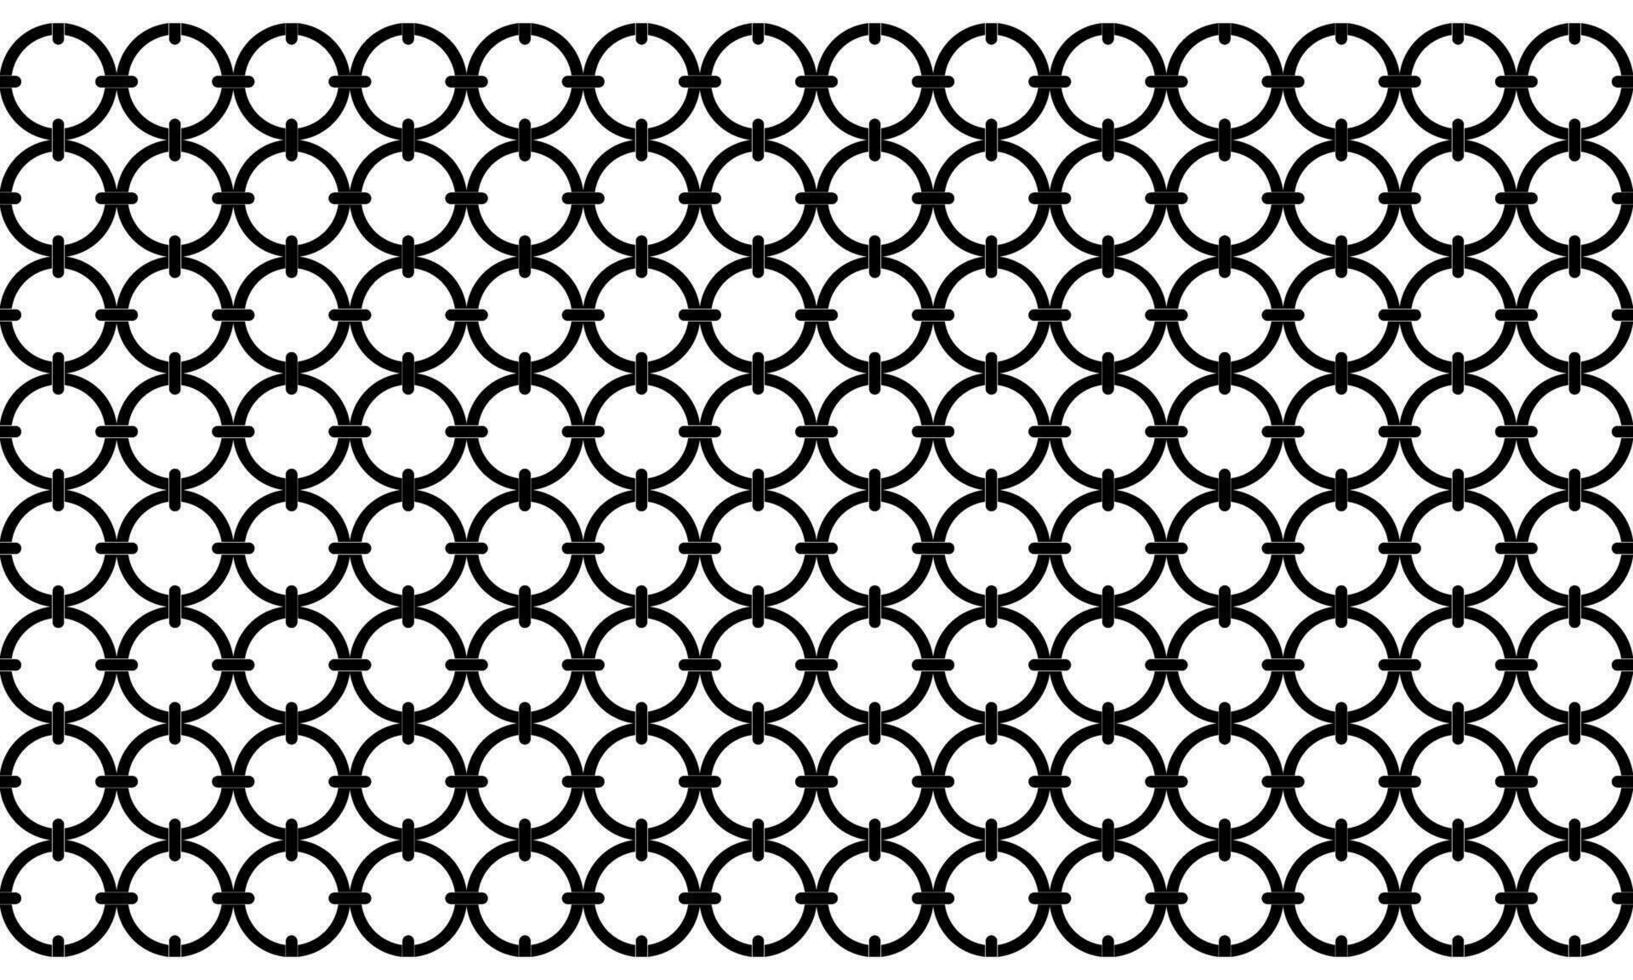 Connection Circle Shape Motifs Pattern, can use for Ornate, Background or for Decoration. Modern Contemporary Pattern Style. Vector Illustration